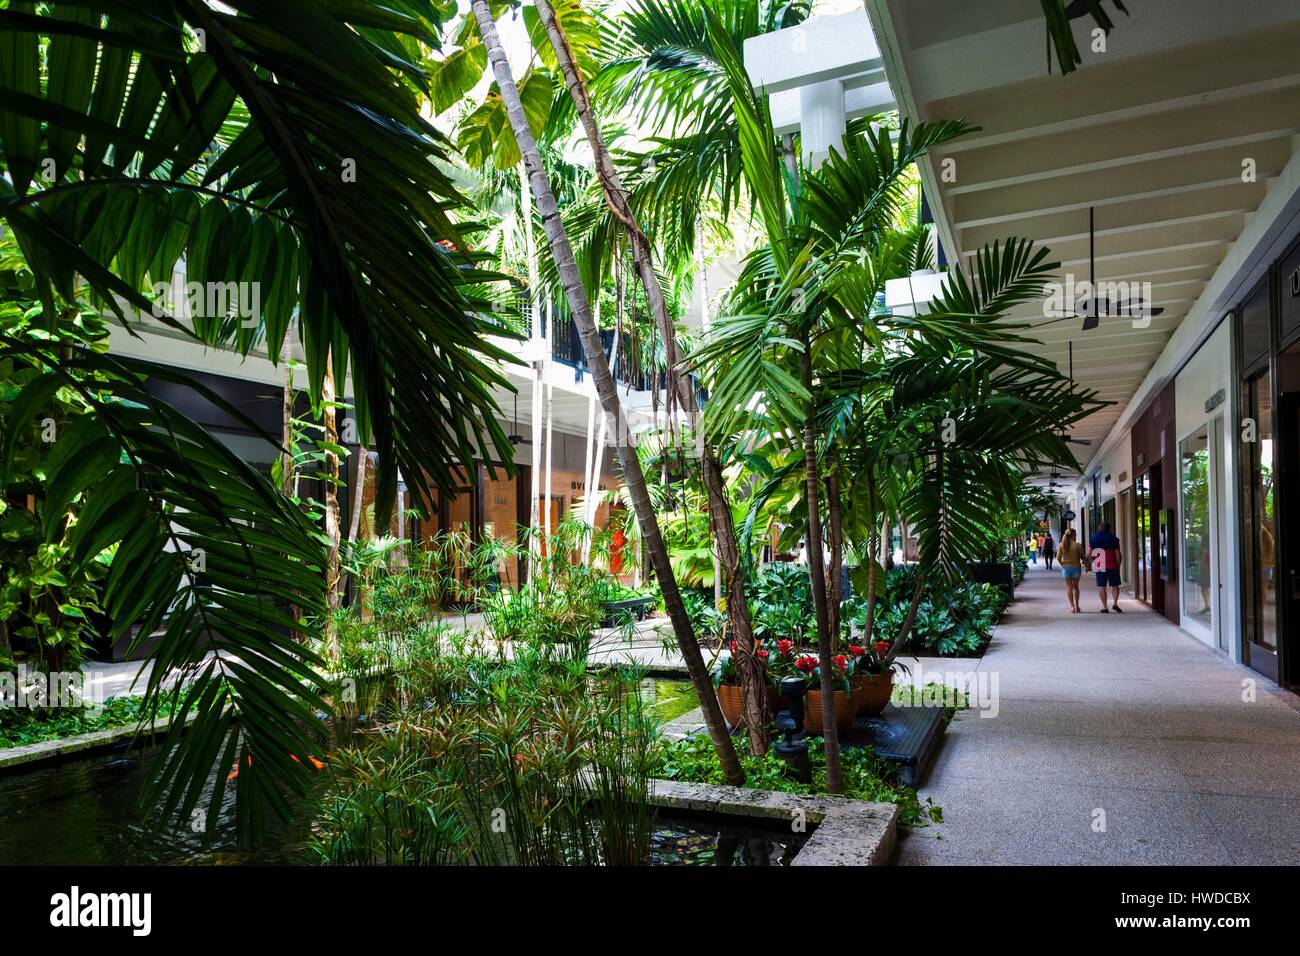 Bal Harbour Shops, a high-end outdoor Miami shopping mall